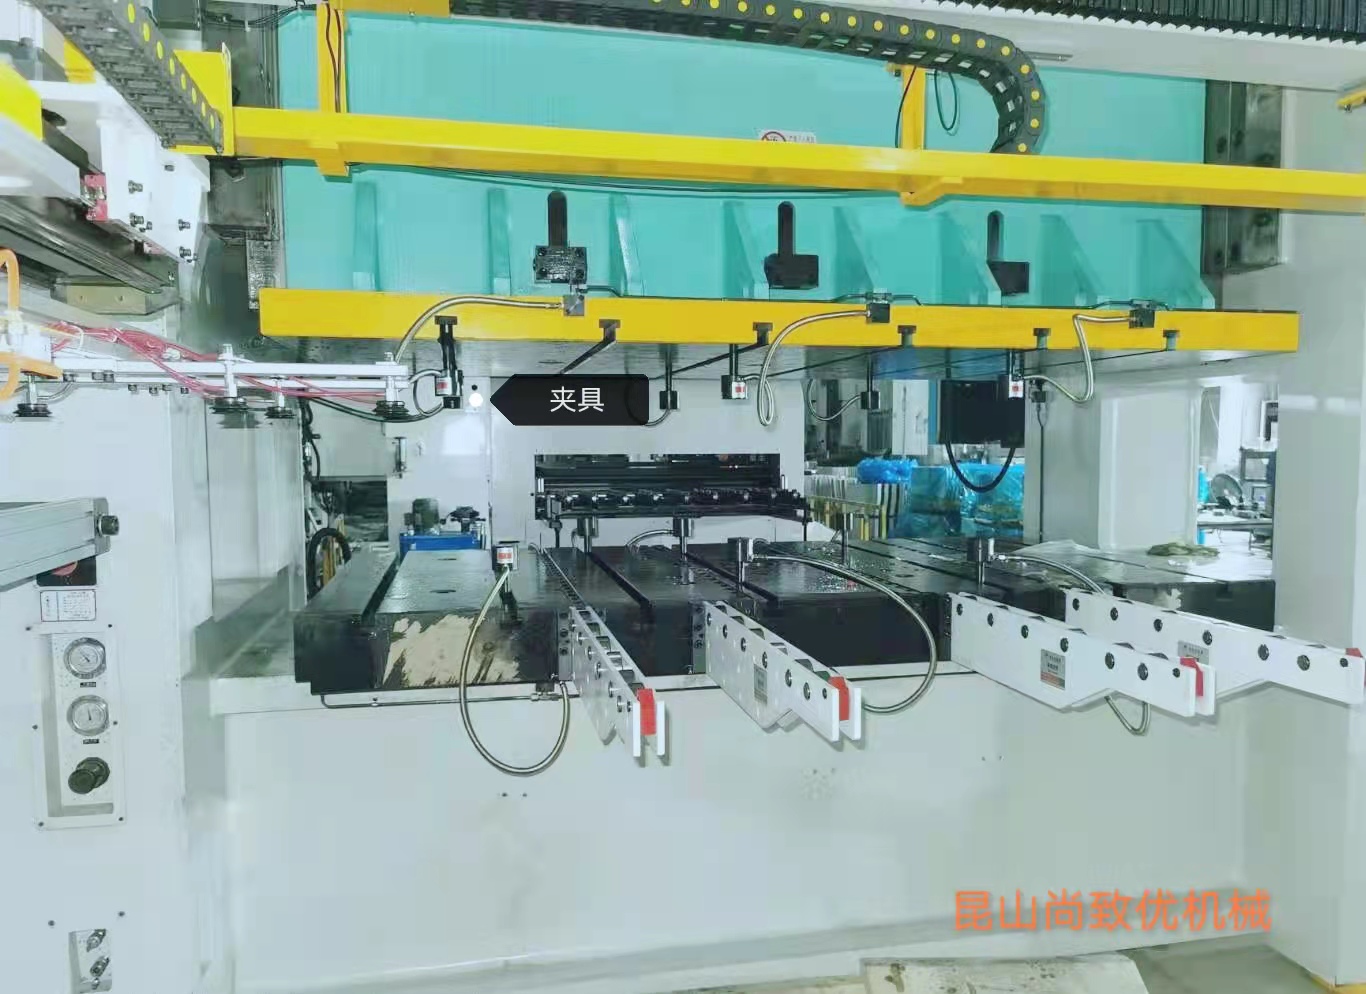 How to improve the efficiency of hydraulic rapid mold changing system in injection molding machines